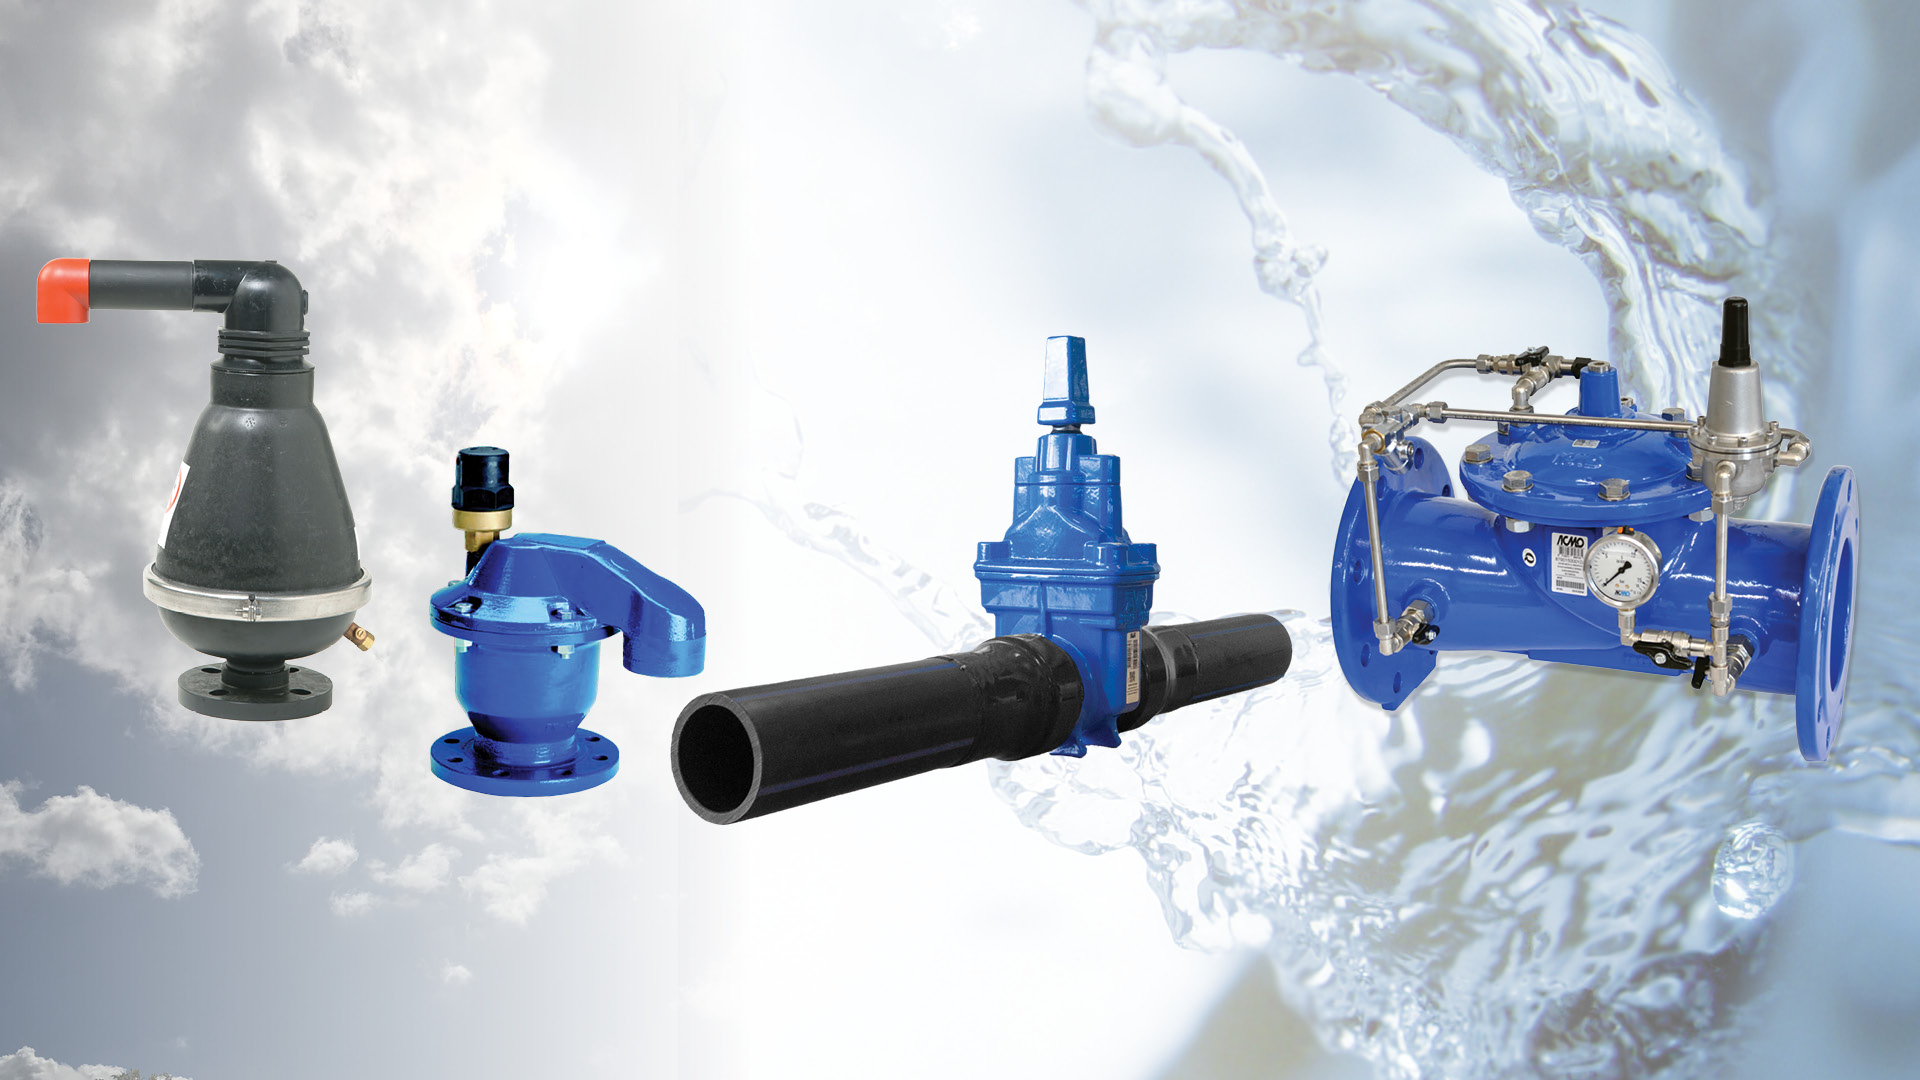 Products to reduce leakage and water loss in water networks and pipelines